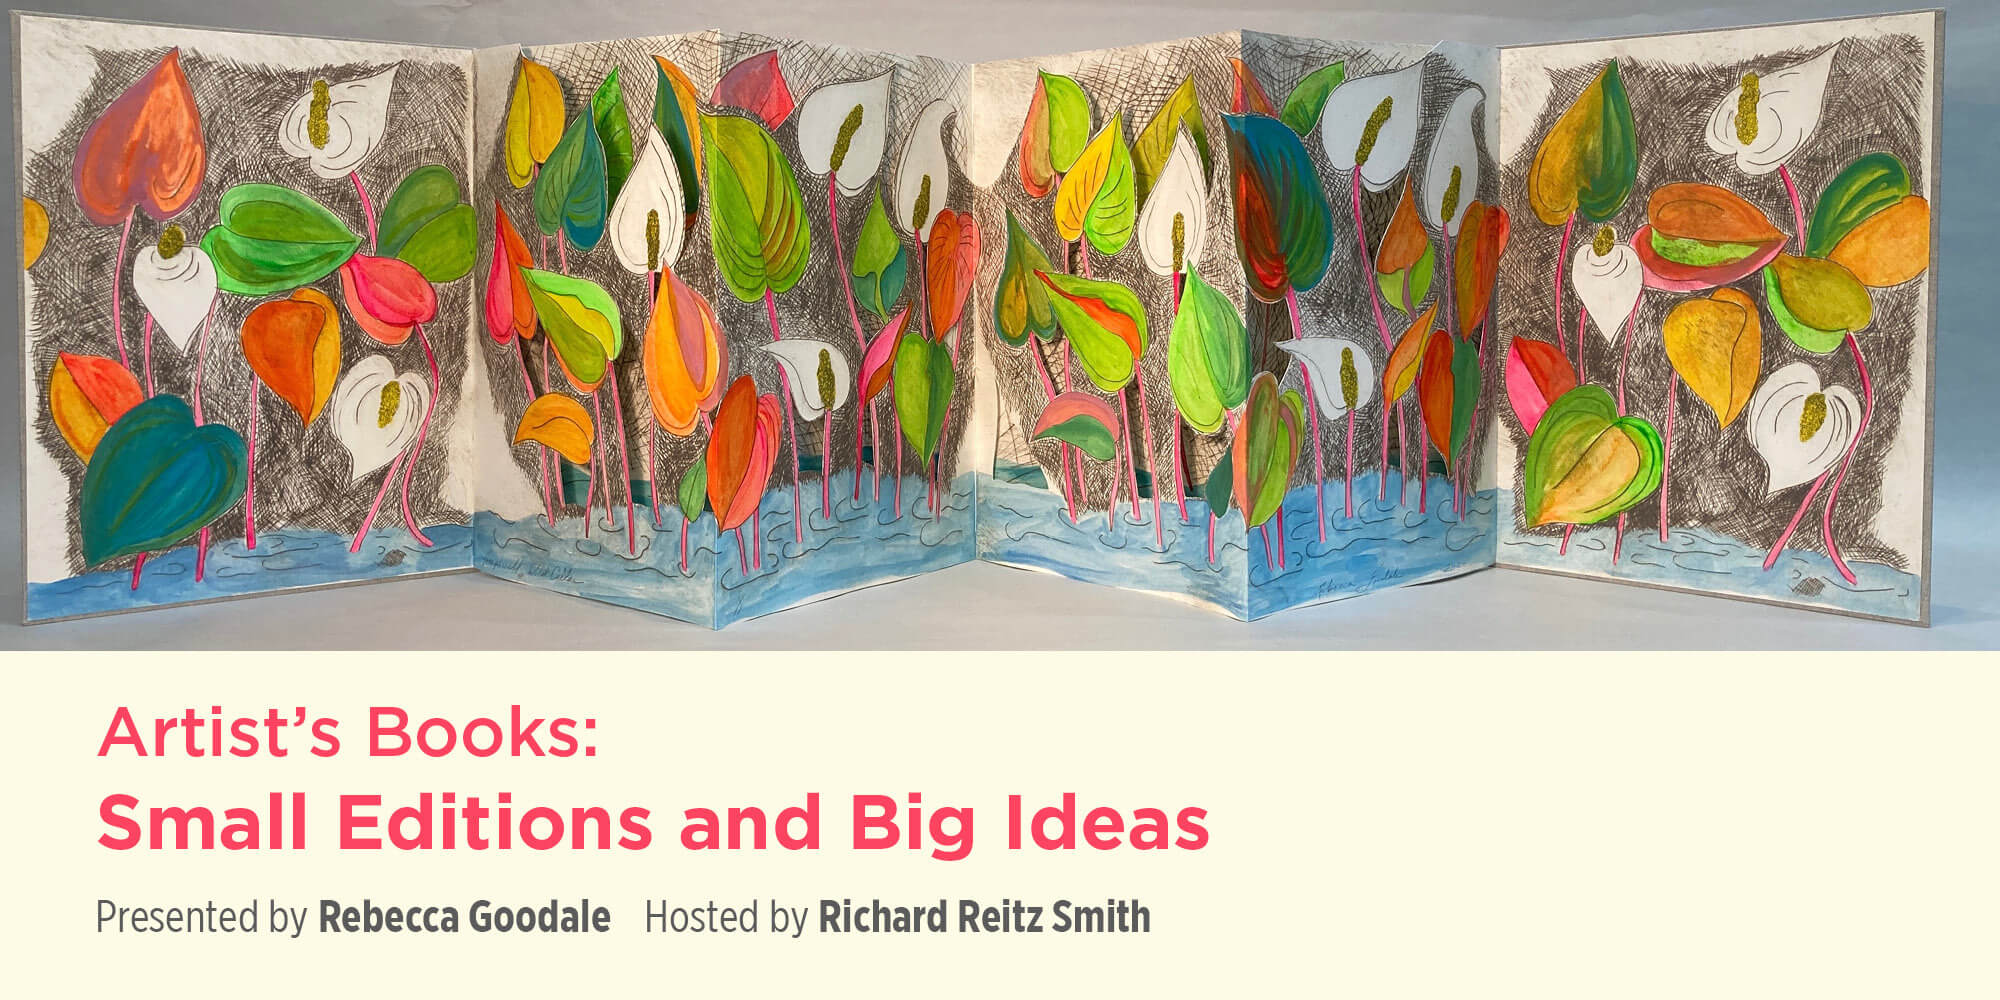 2022 Alumni Lecture Series - Artist’s Books: Small Editions and Big Ideas with Rebecca Goodale